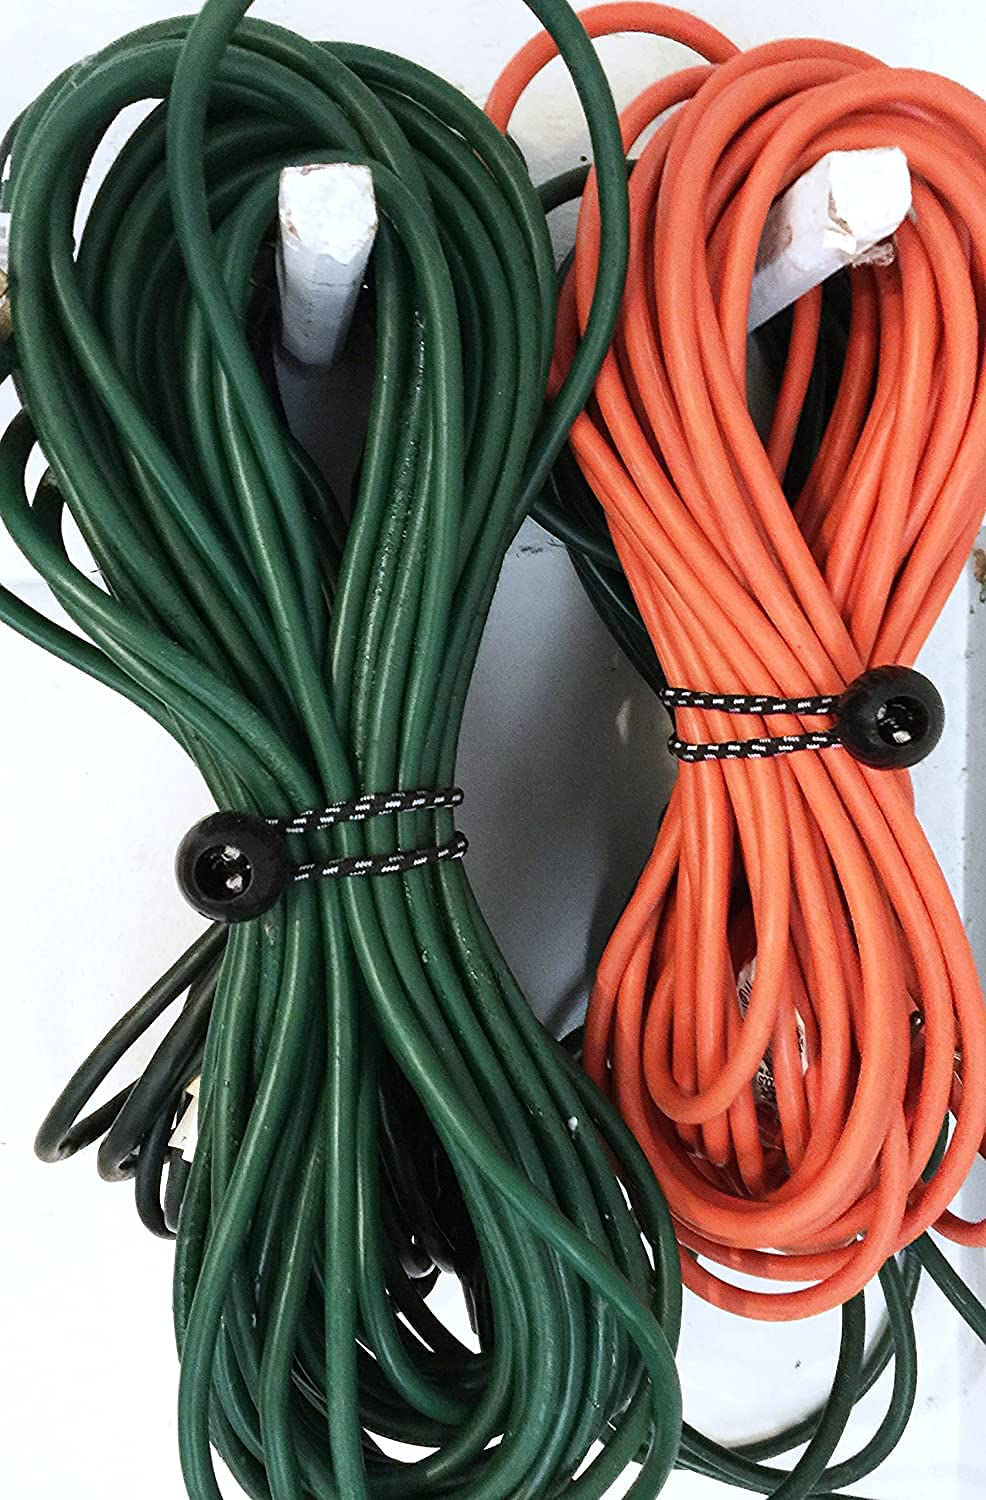 Kotap BB-6B Ball Bungee Cords with Elastic String for Canopy, Tarp, Straps, Tent, Poles and Wires